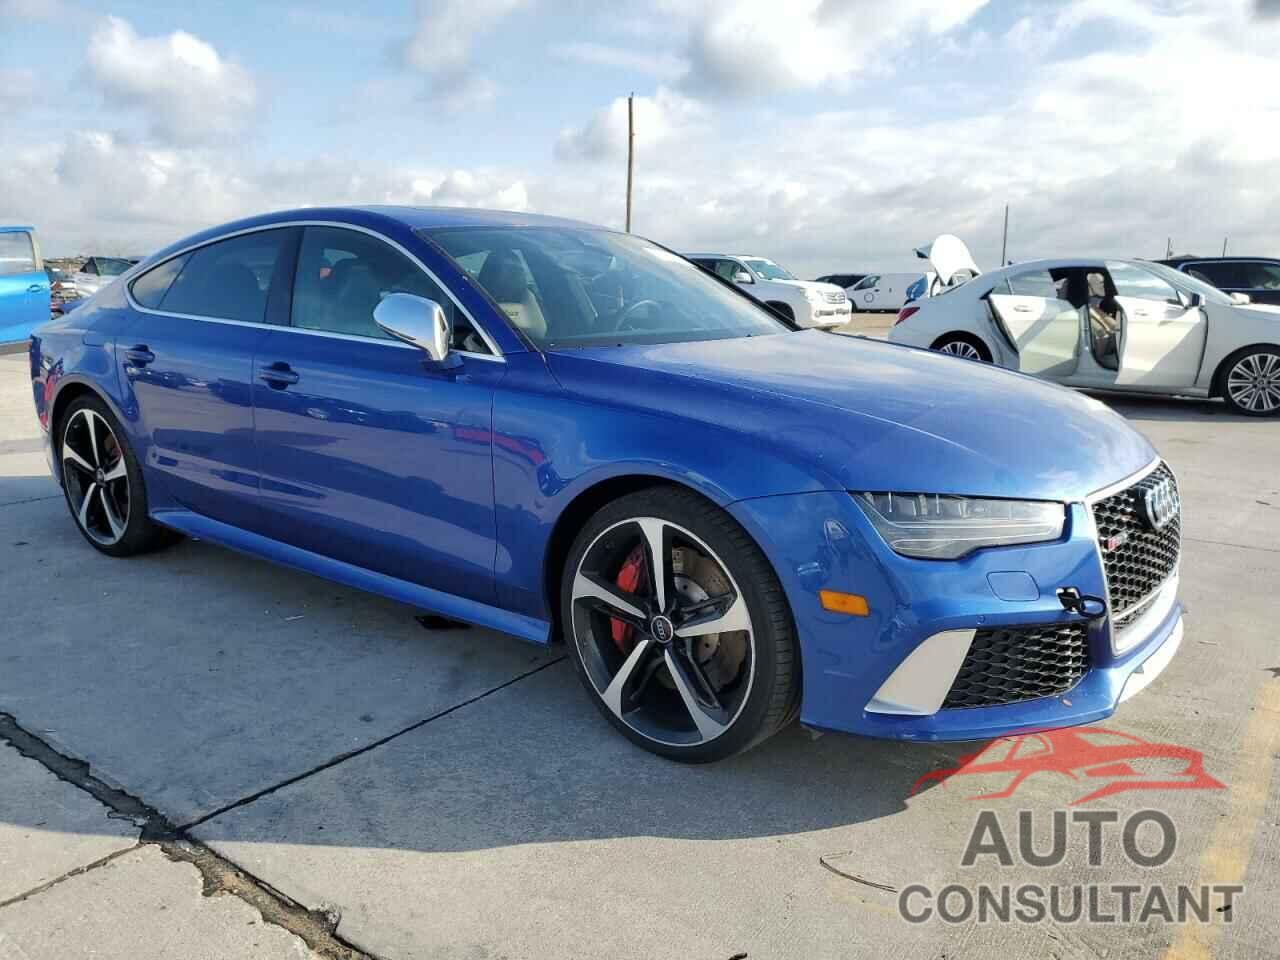 AUDI S7/RS7 2016 - WUAW2AFC5GN903546